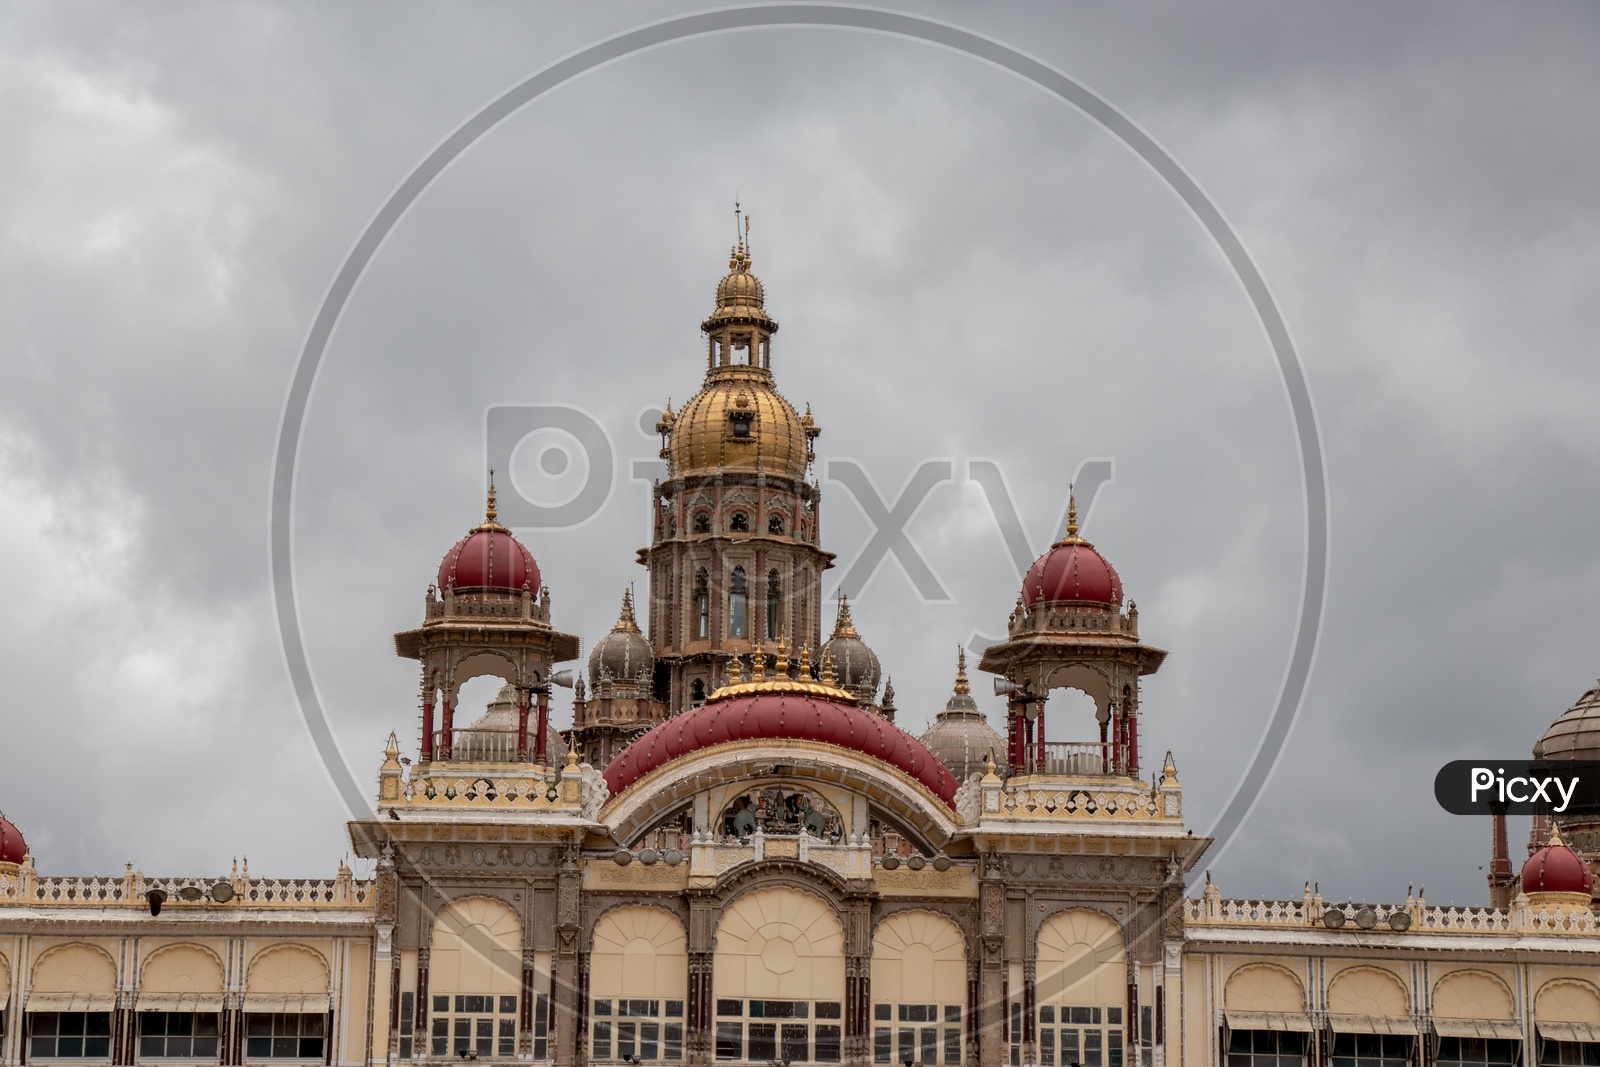 Architecture Of Mysore Palace With Domes And Designs